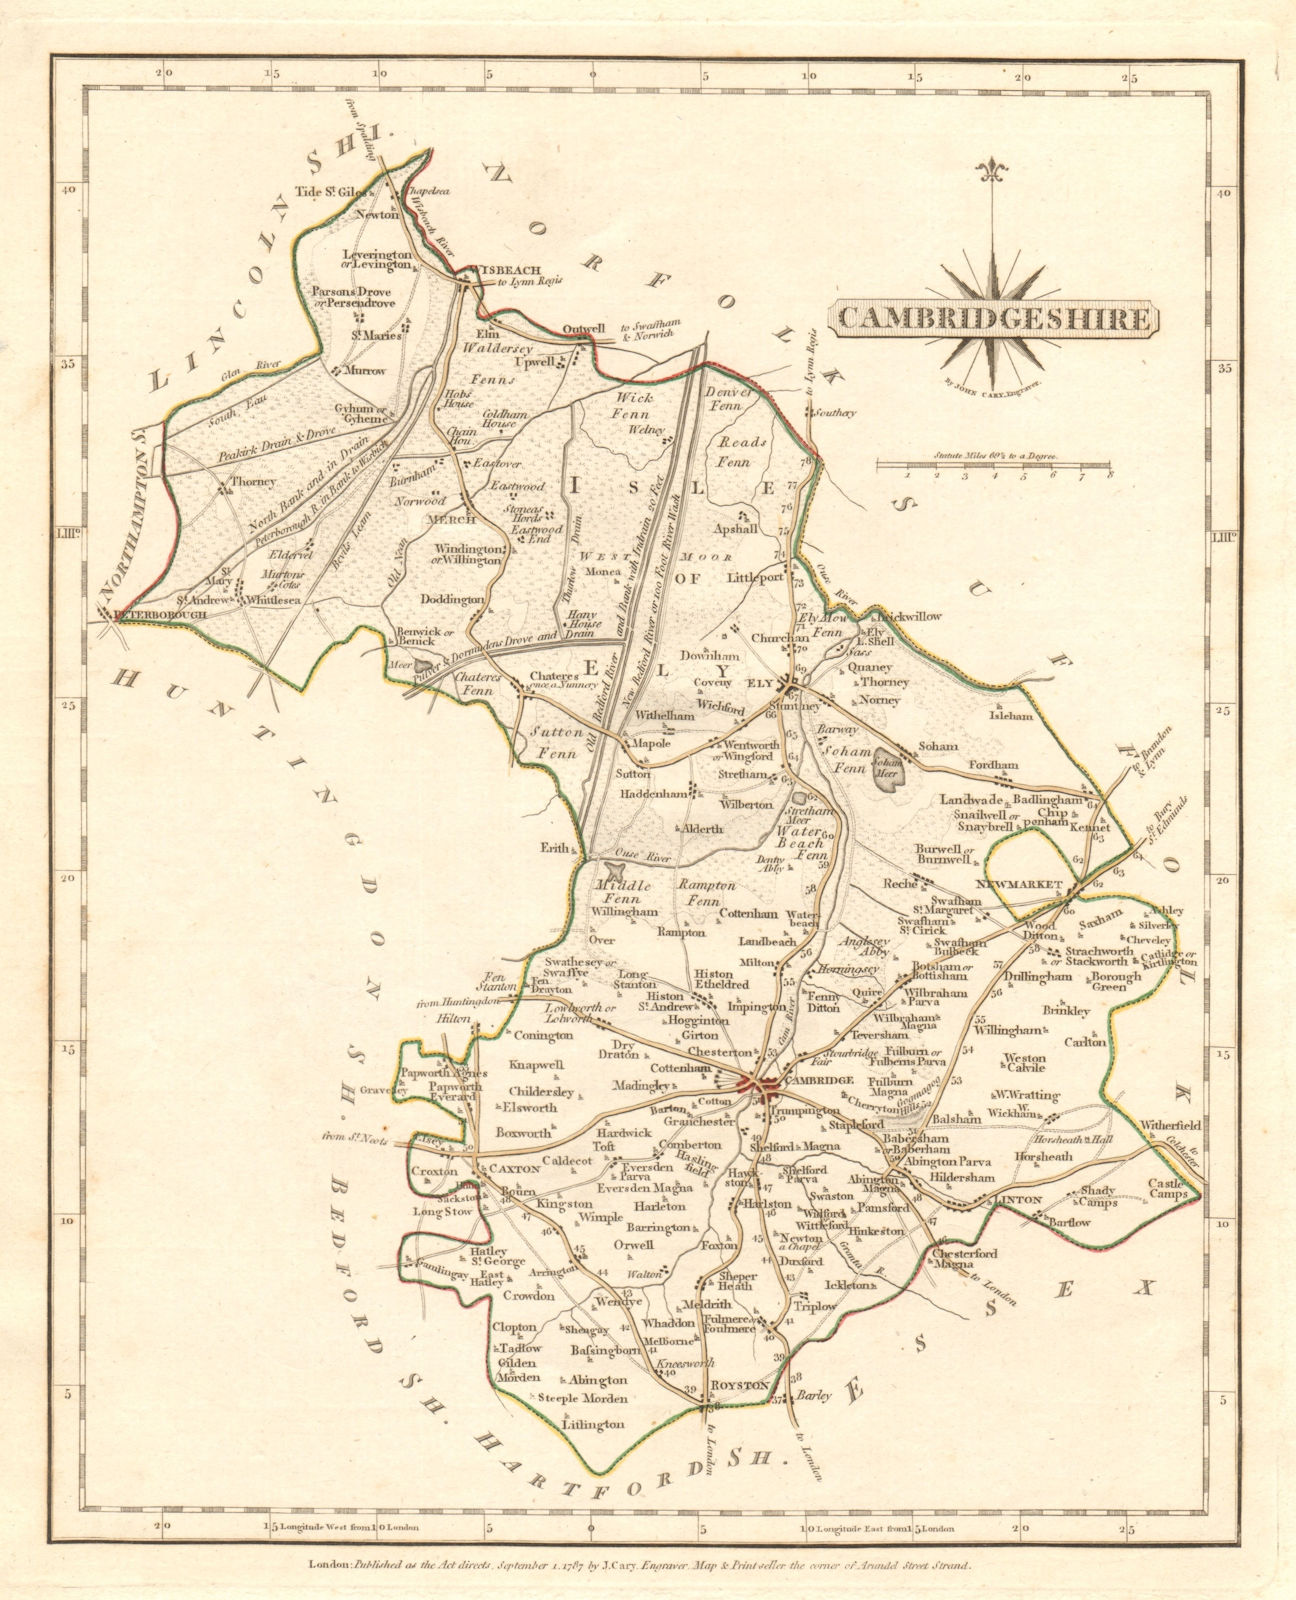 Associate Product Antique county map of CAMBRIDGESHIRE by JOHN CARY. Original outline colour 1787